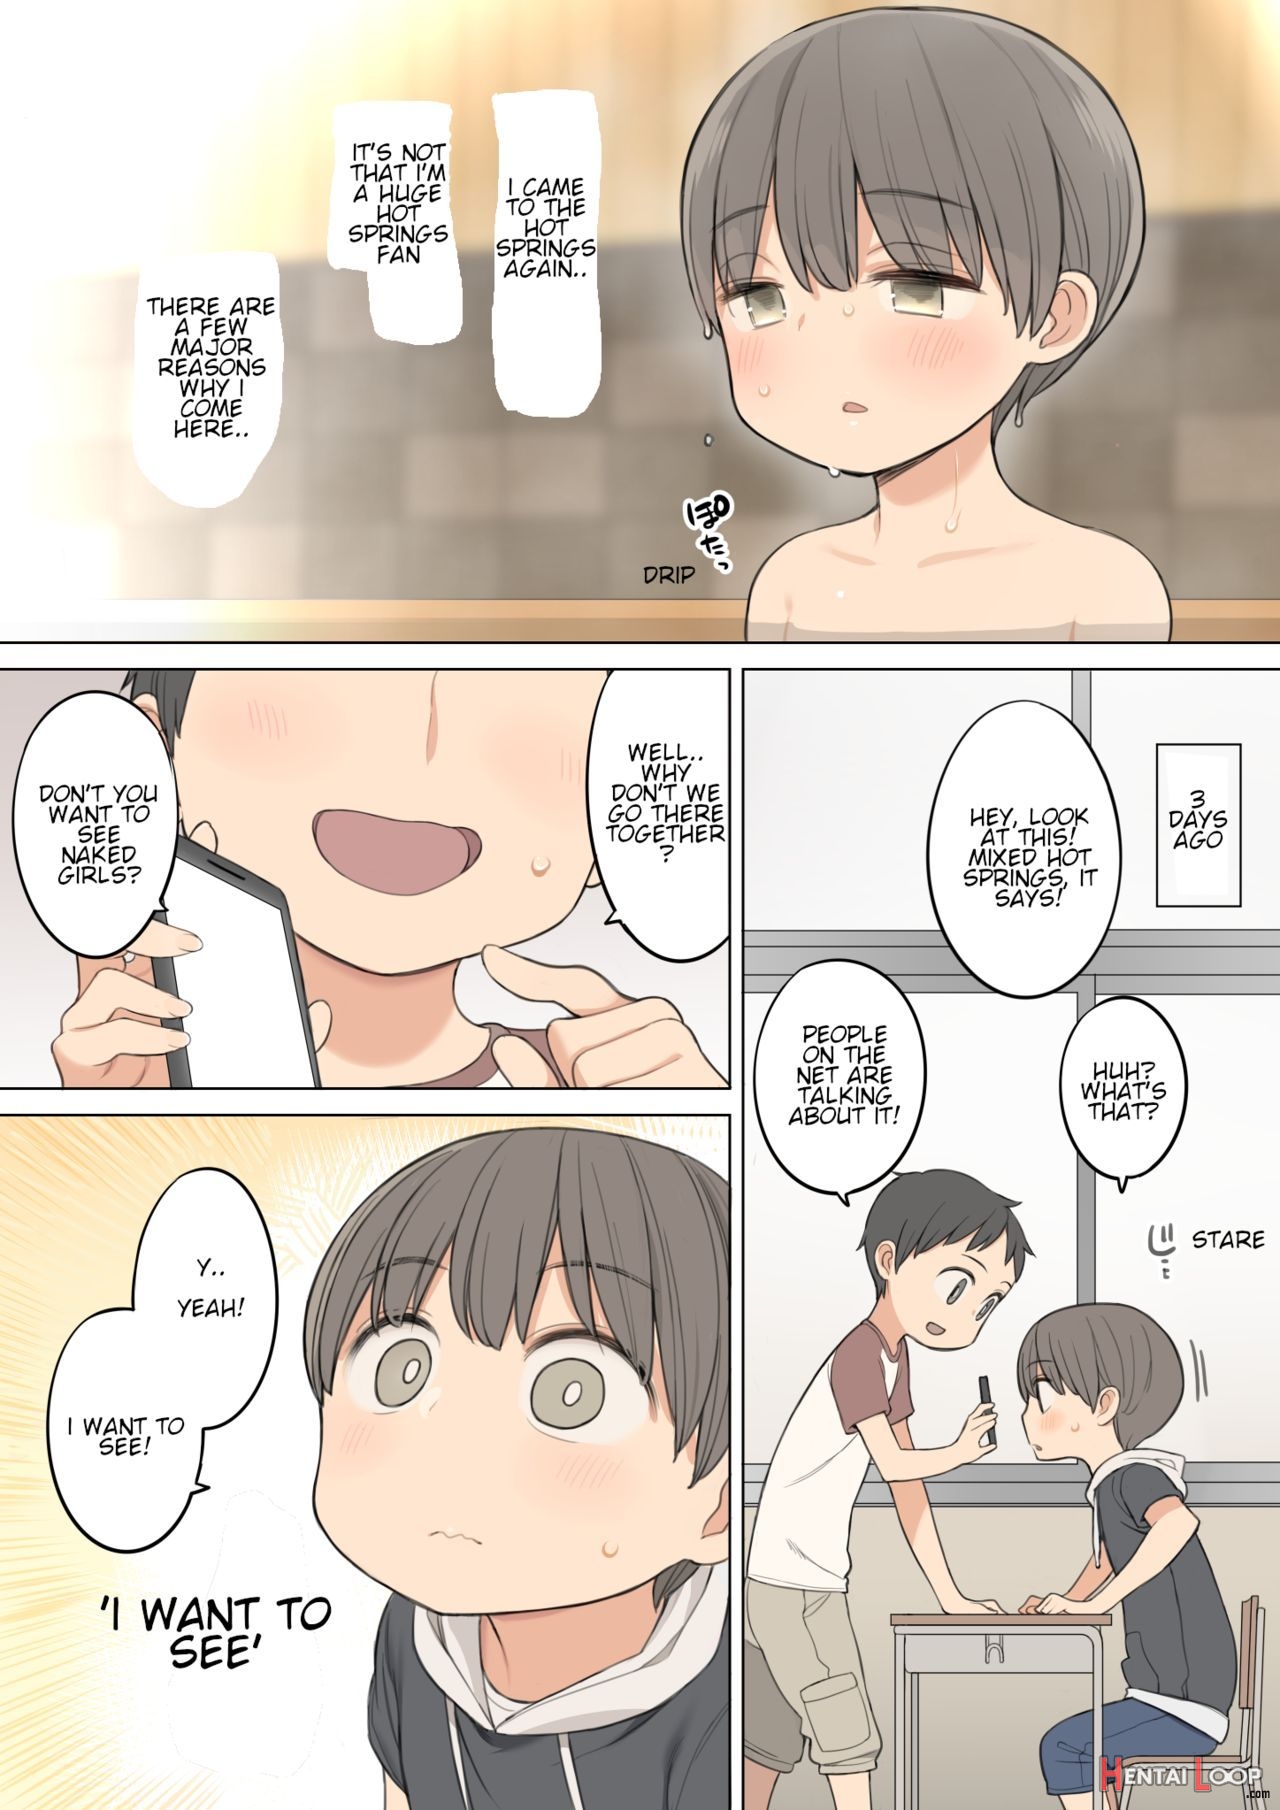 Story Of How I Came A Lot With An Older Oneesan At The Mixed Hot Spring Bath page 1